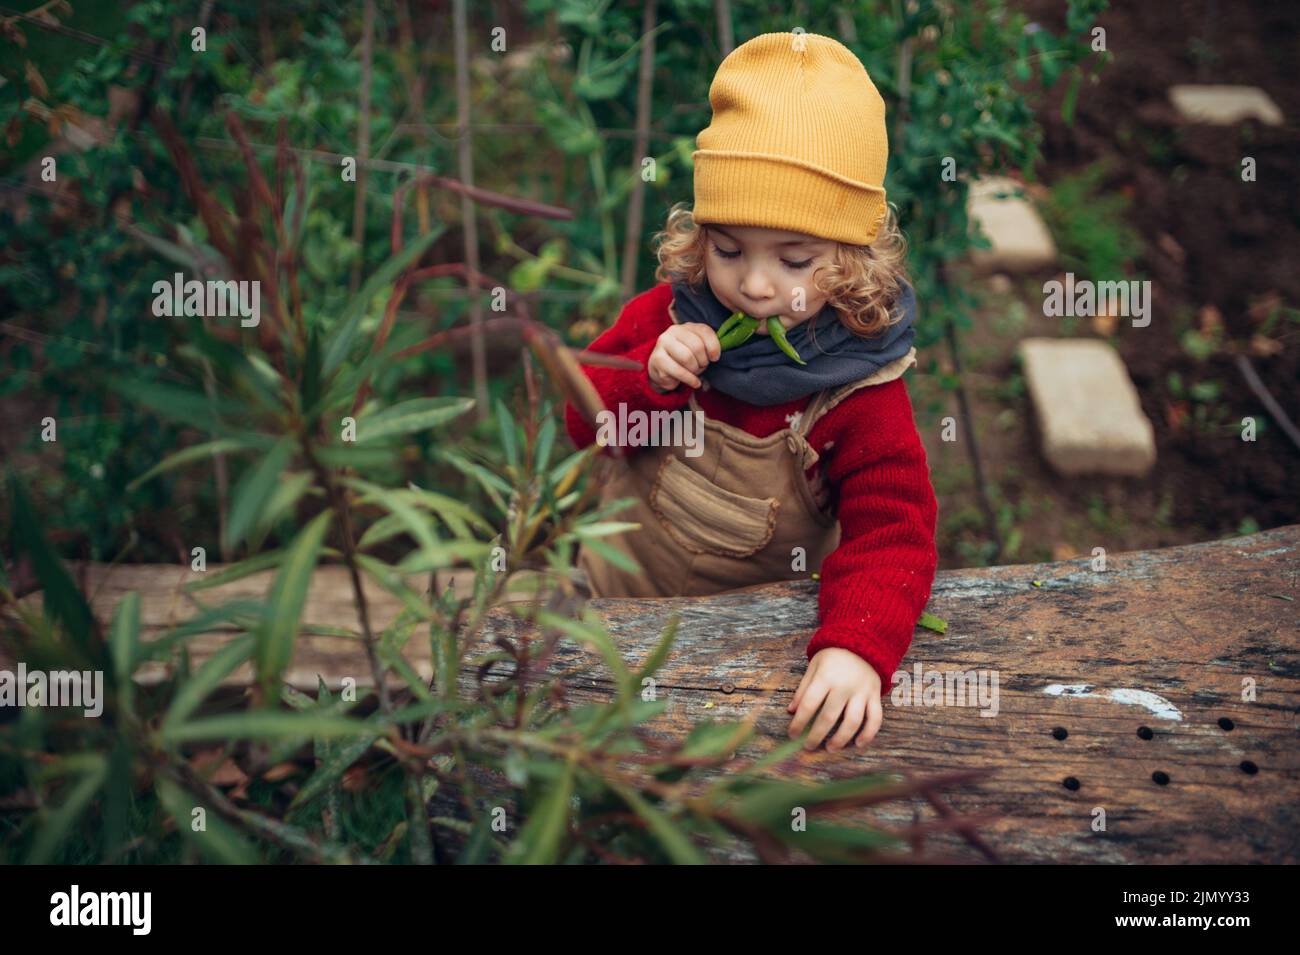 Little girl eating harvested organic peas in eco garden, sustainable lifestyle concept. Stock Photo